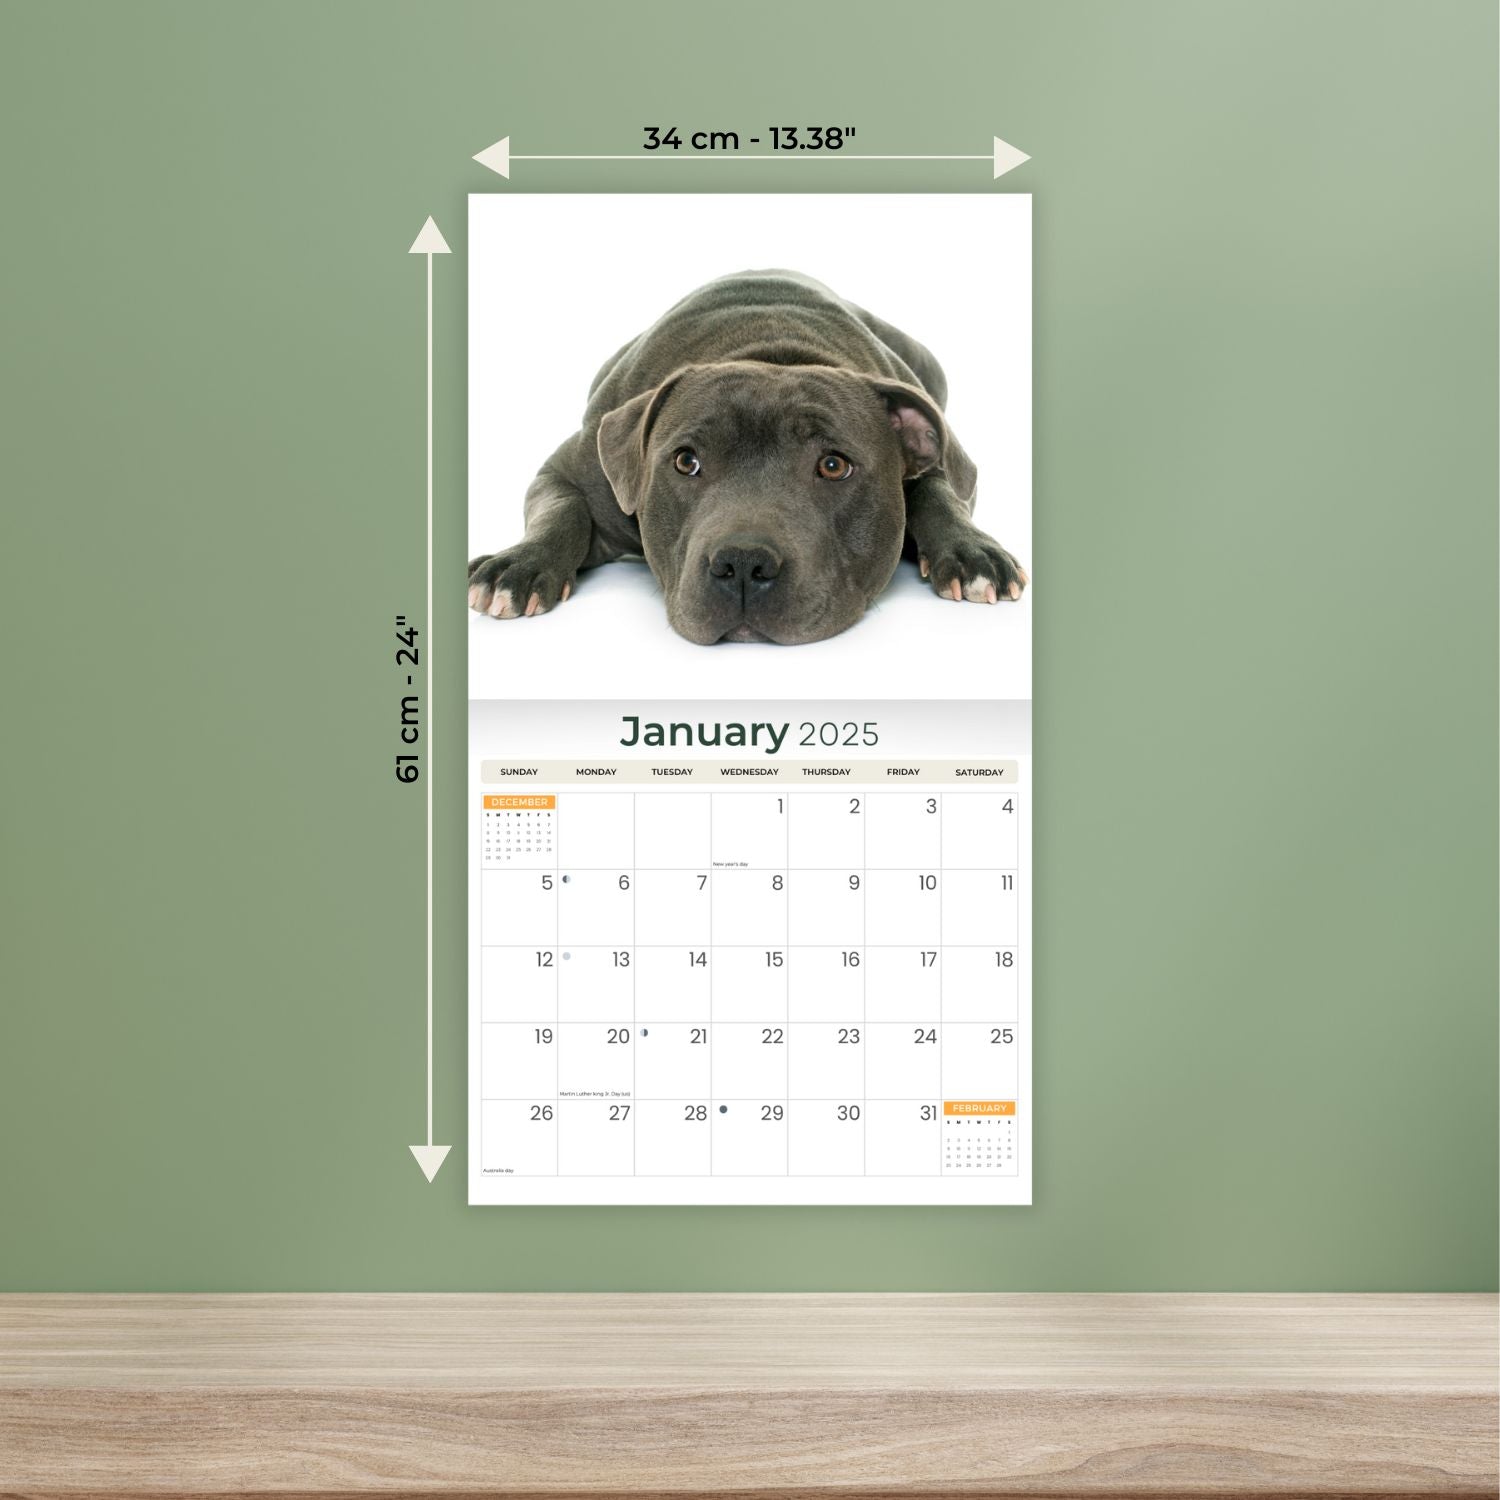 2025 Staffordshire Bull Terriers - Deluxe Wall Calendar